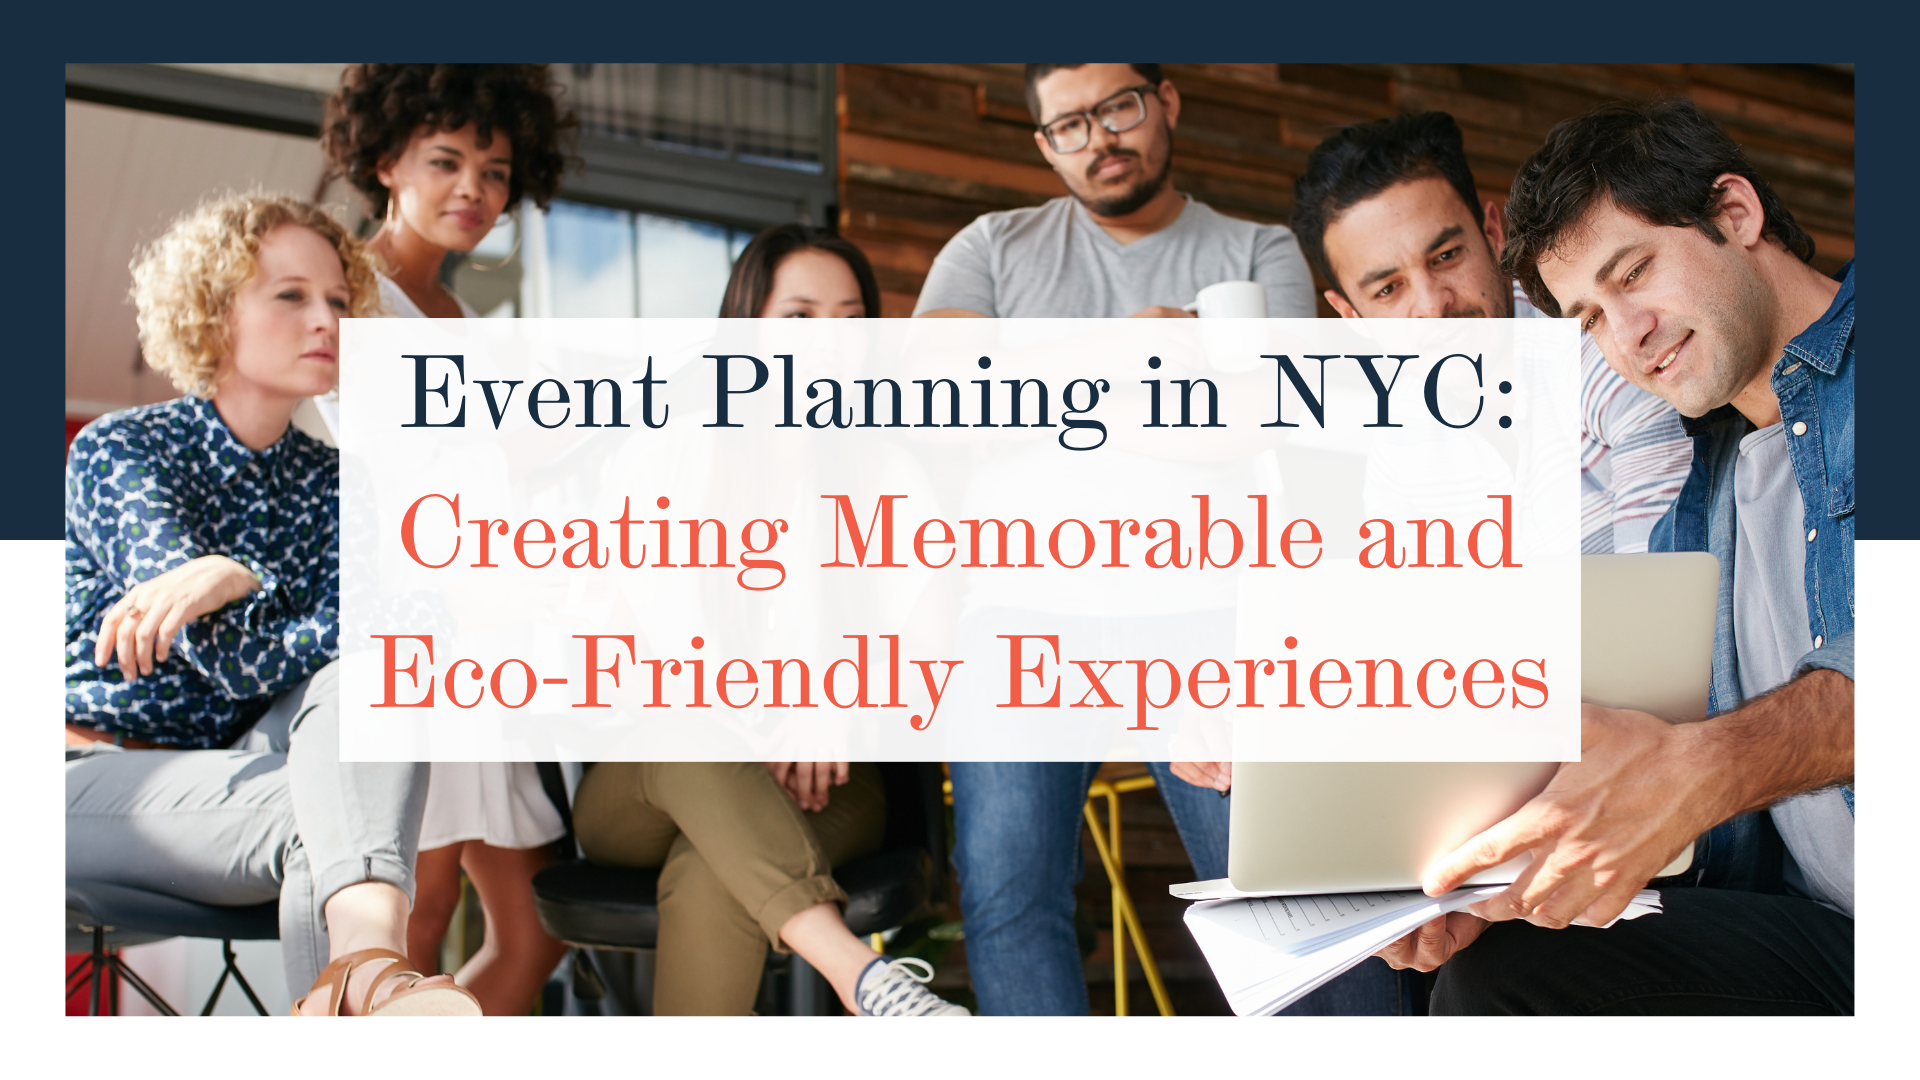 Sustainable Event Planning in NYC